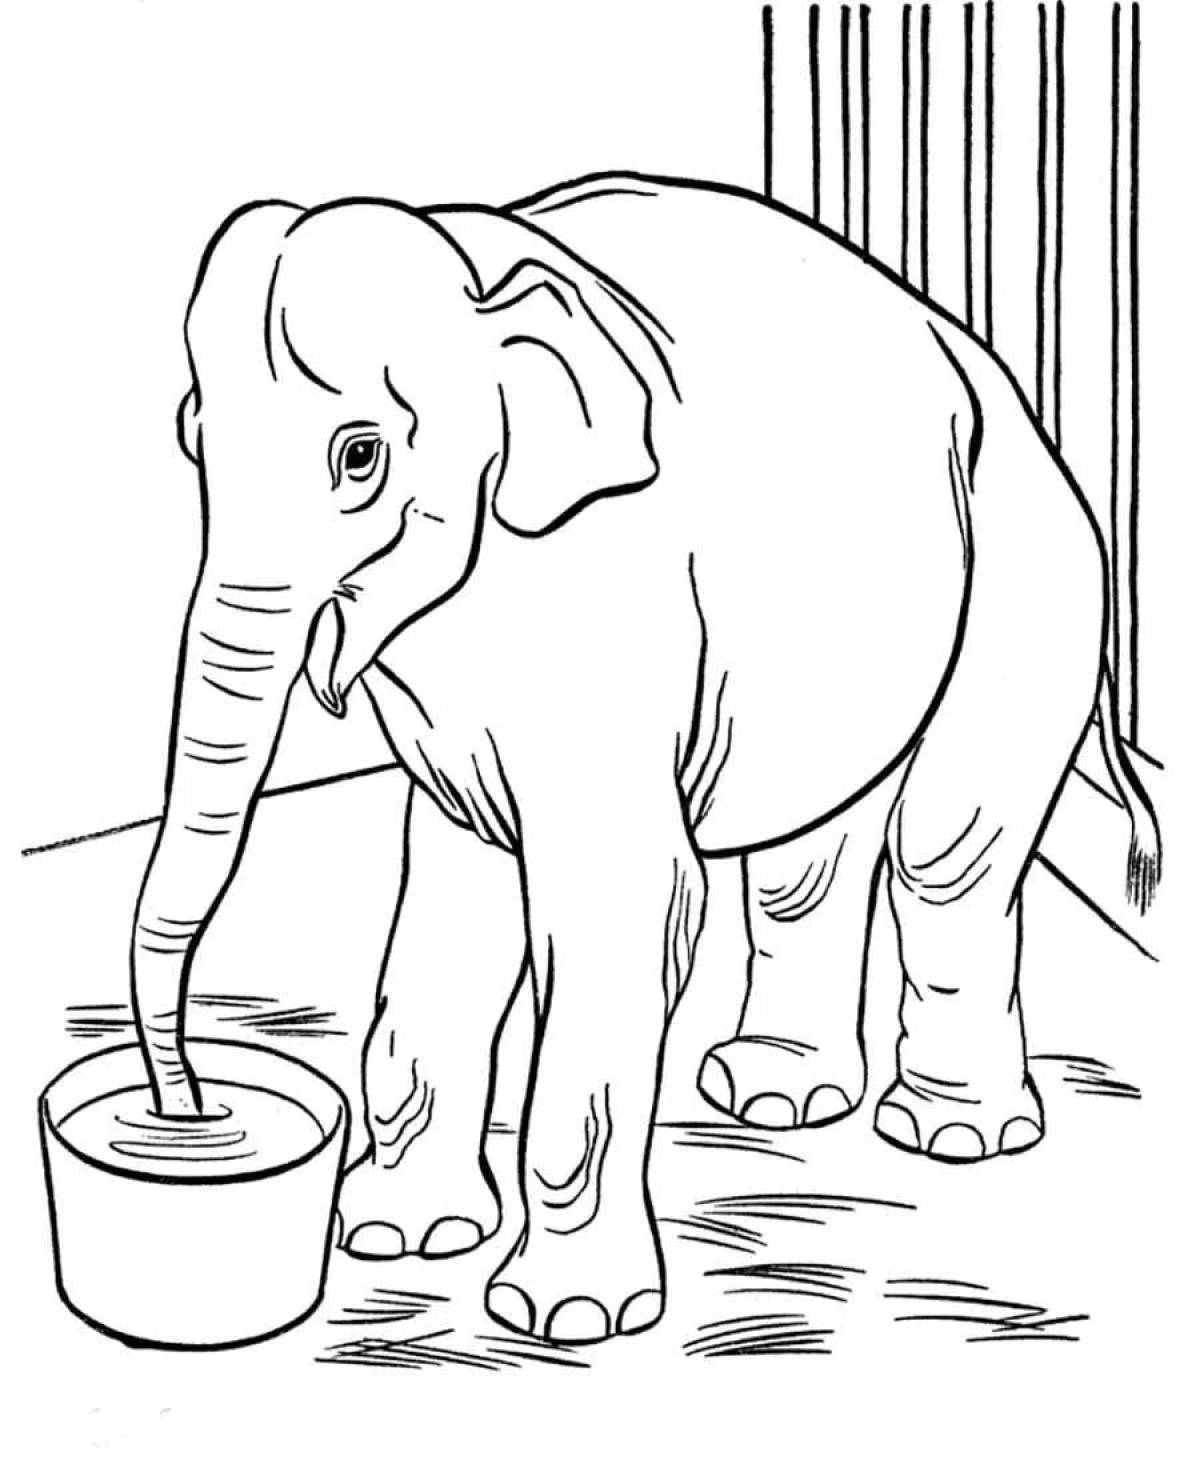 Exciting elephant coloring